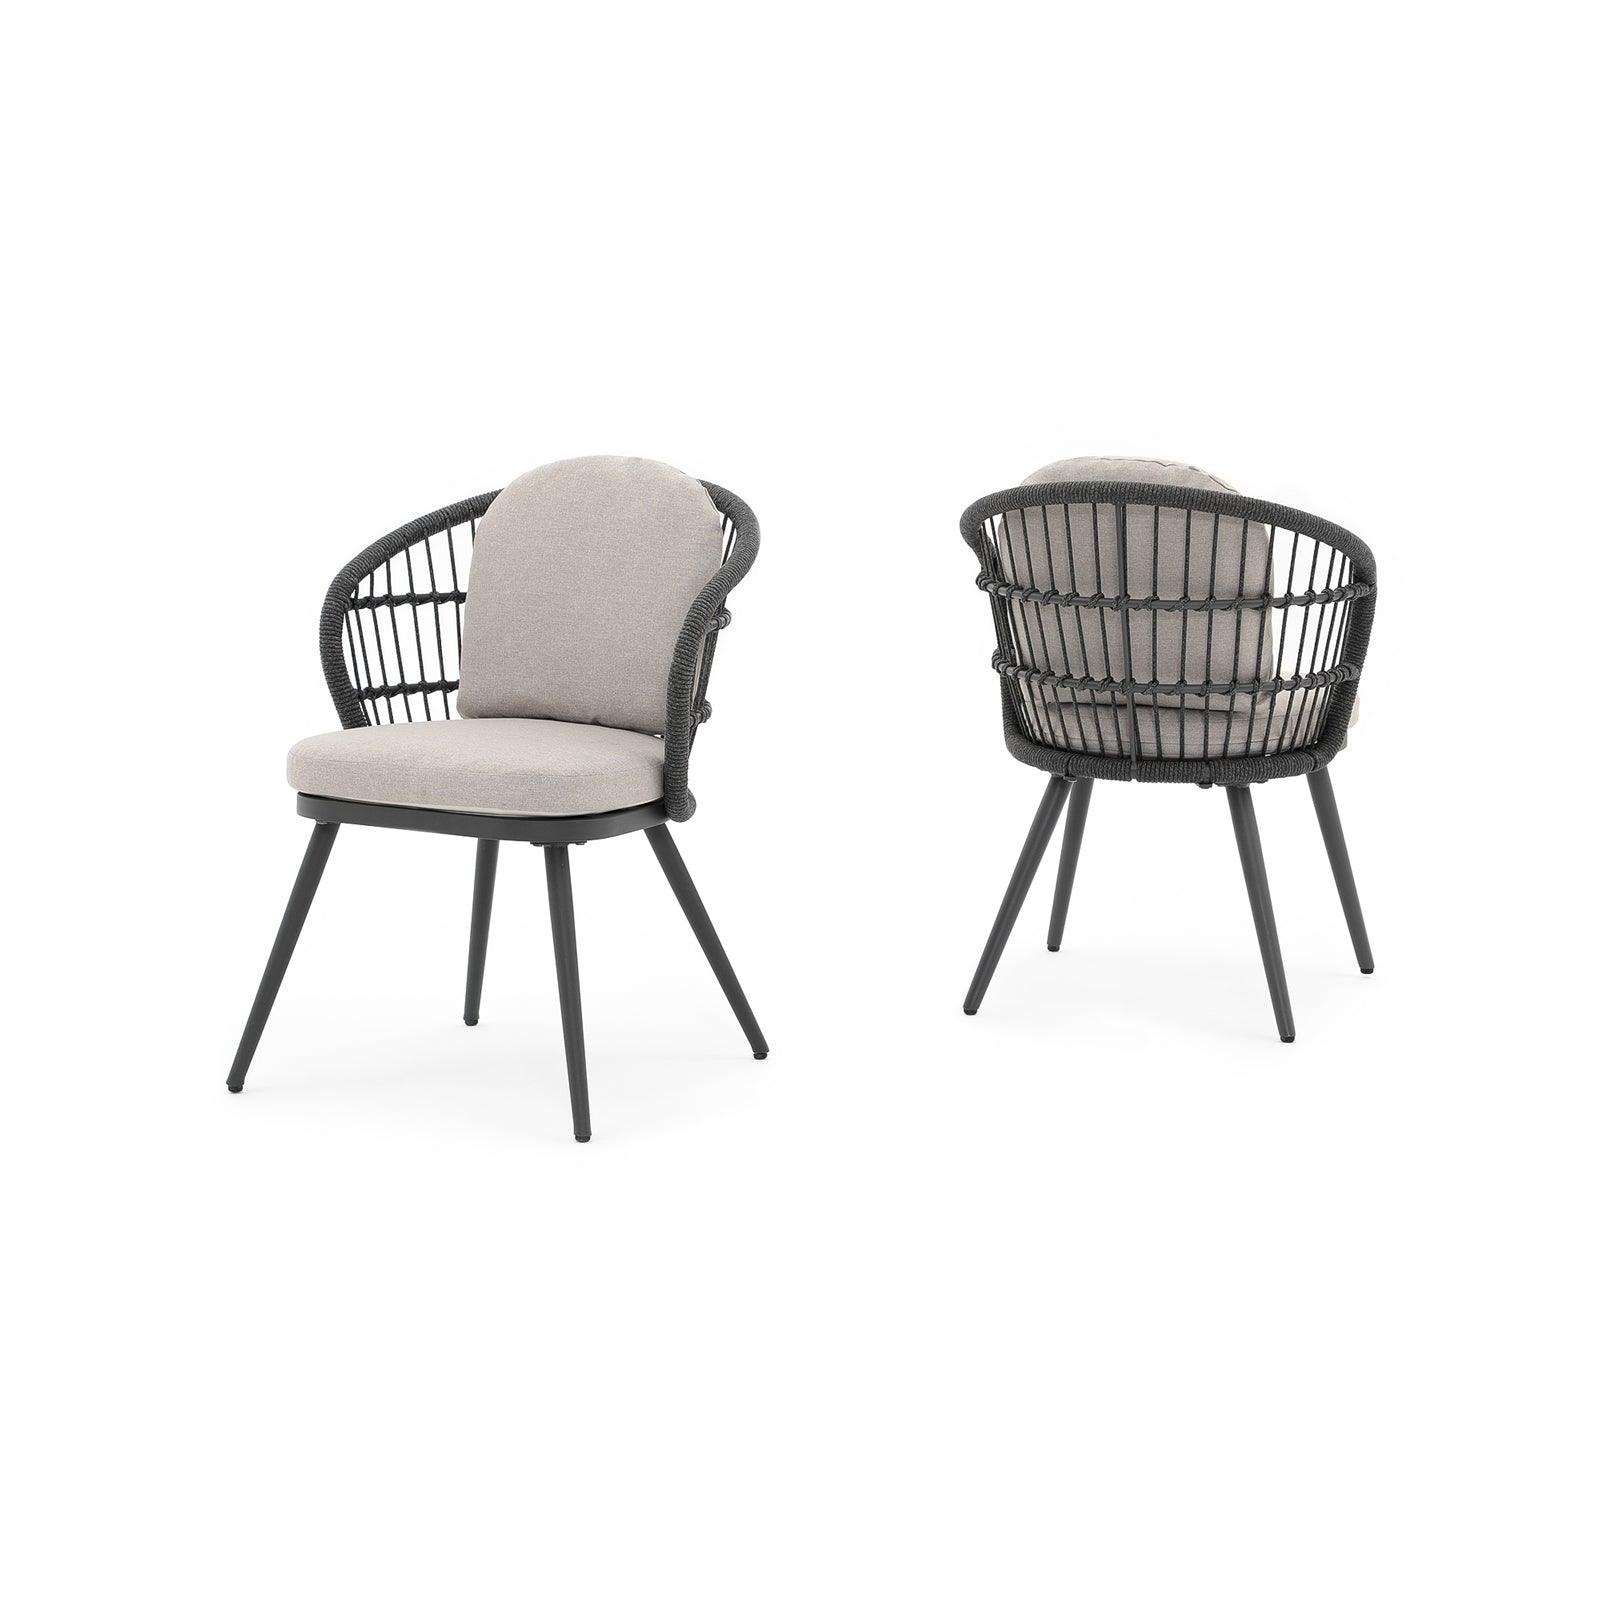 Comino 2-Piece dark grey aluminum dining chairs with backrest rope design and light grey cushions, Side and Back Angle view- Jardina Furniture#Pieces_2-pc.